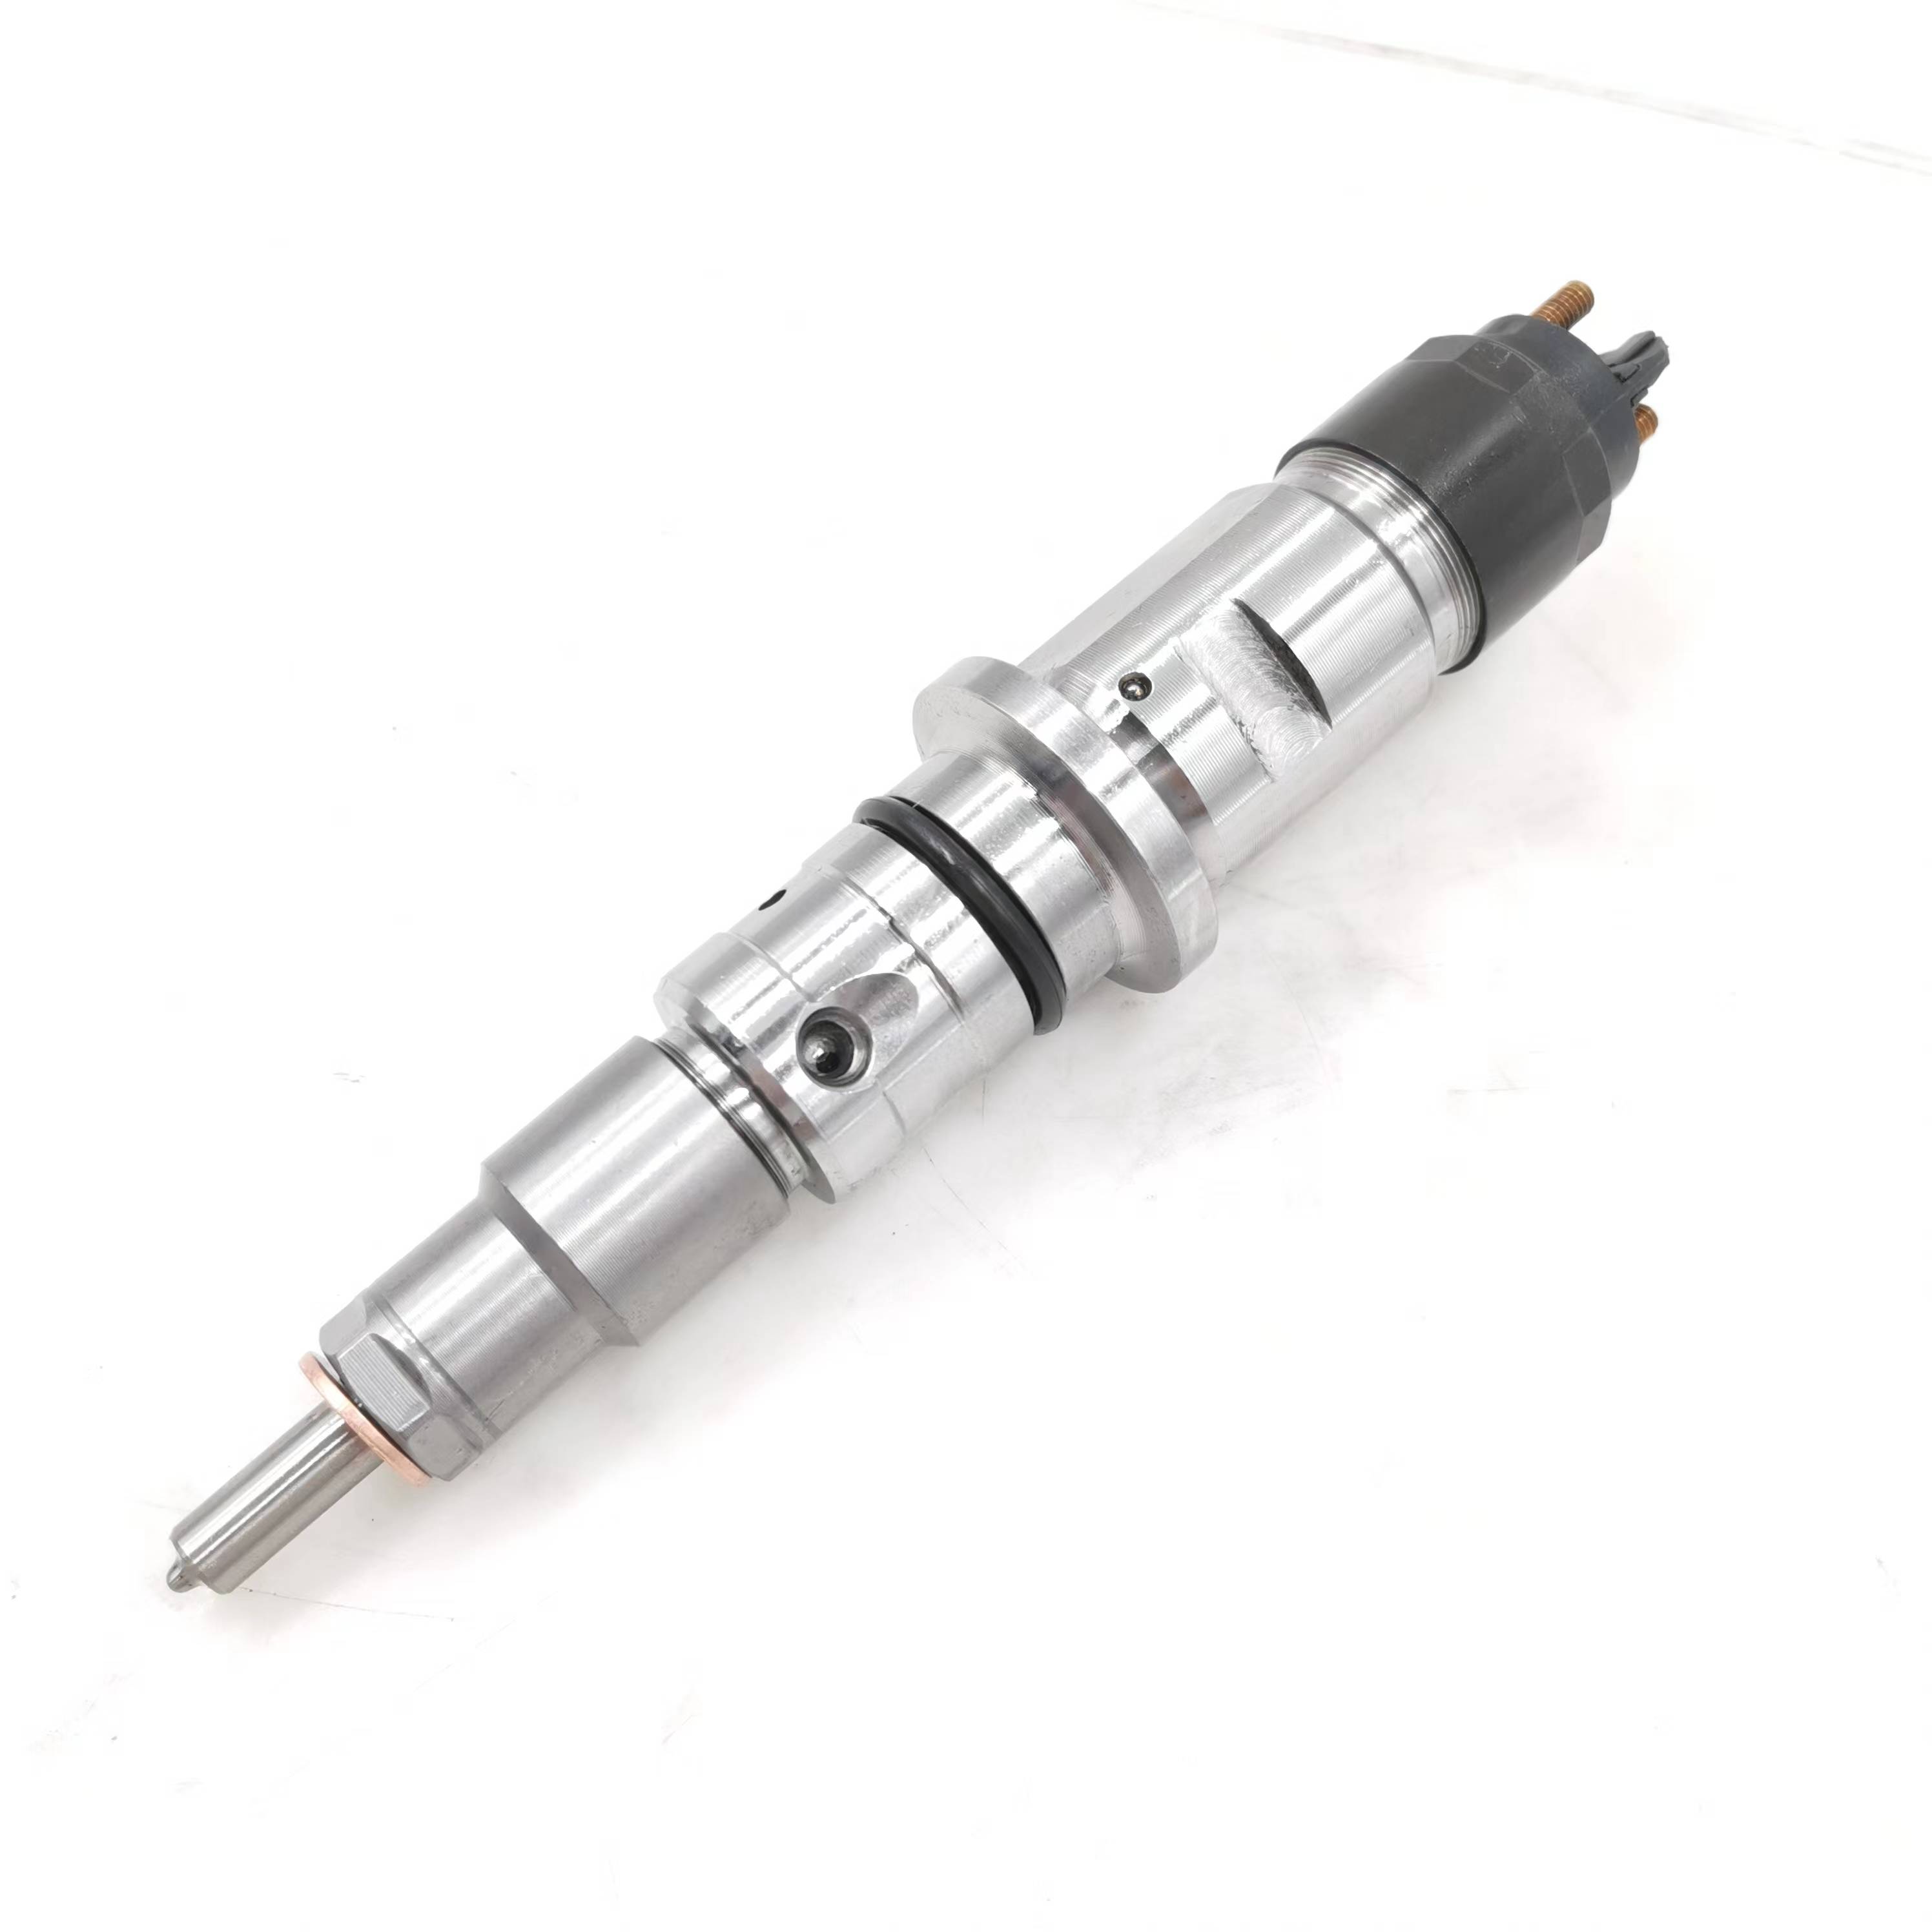 Diesel Injector Fuel Injector 0445120383 compatible with Bosch injector Cummins ISDe ISBe